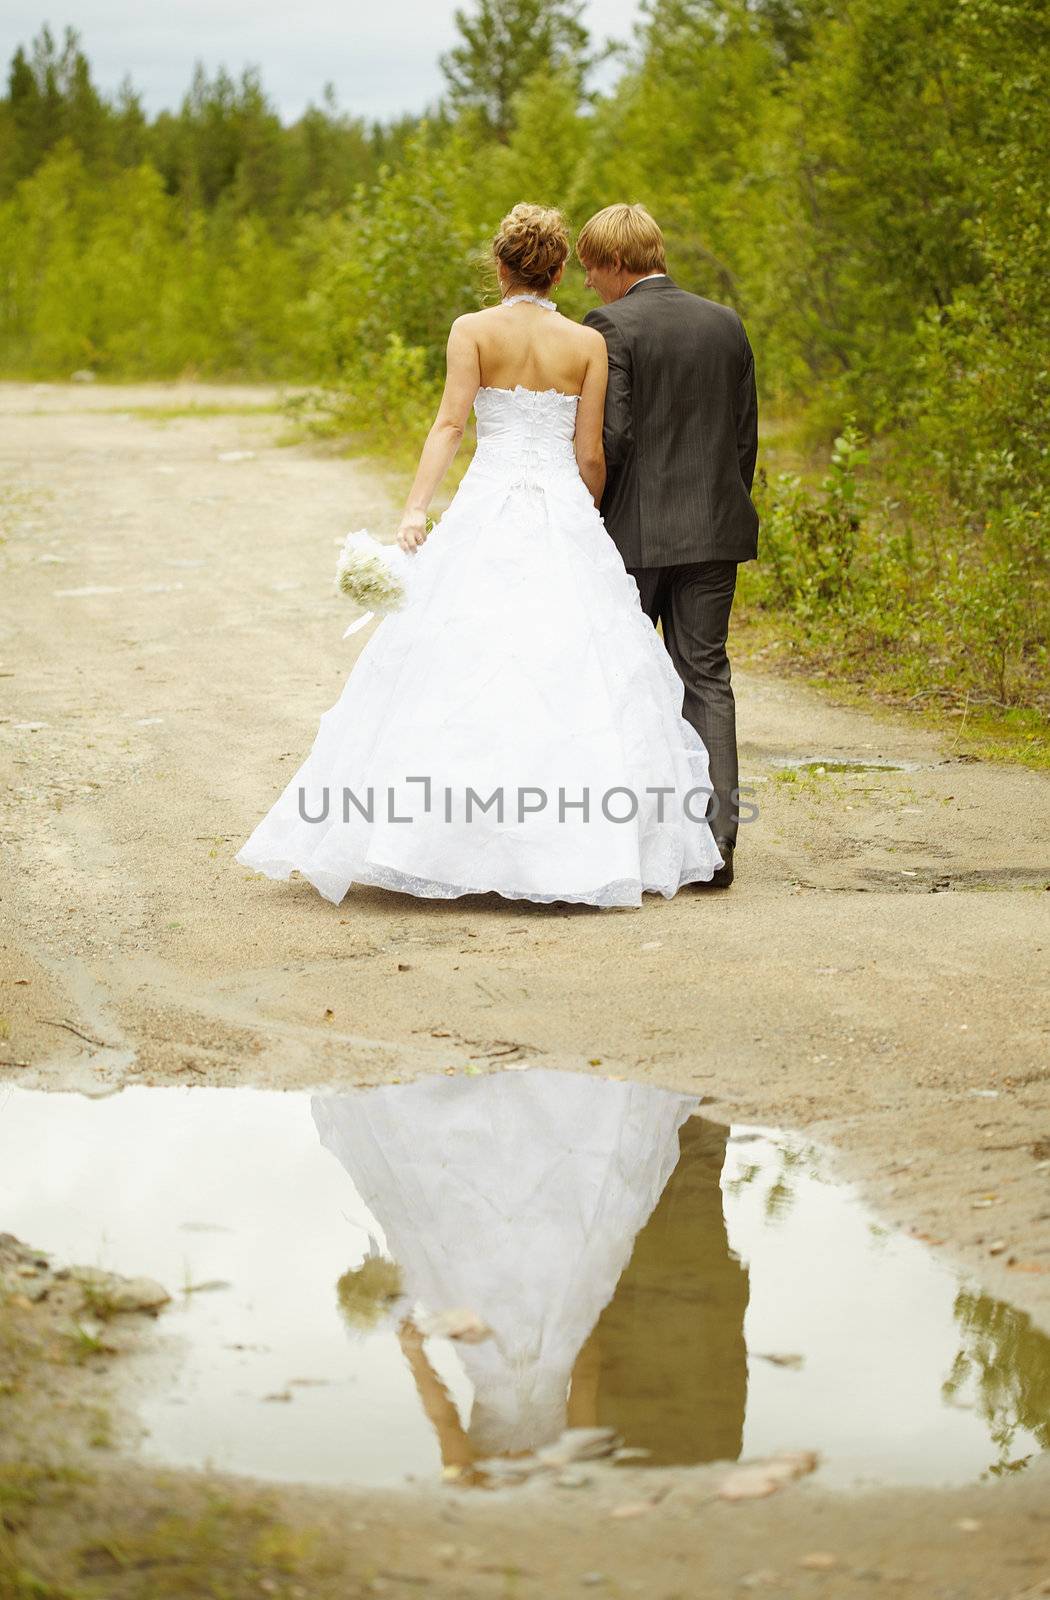 Newly-married couple walks on rural road after a rain